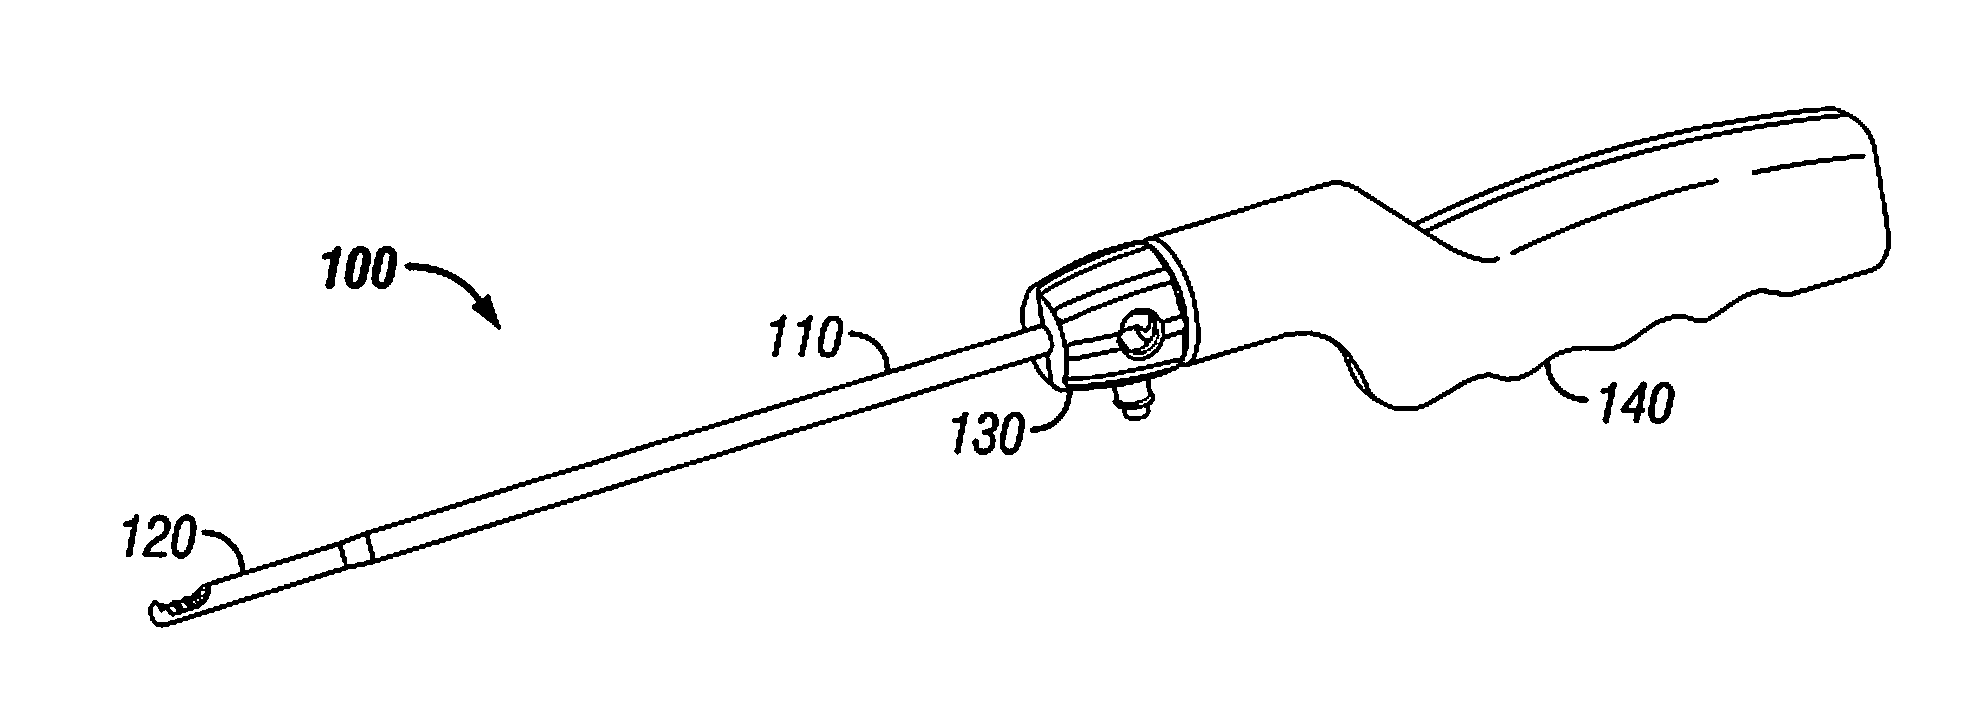 Surgical Disc Removal Tool